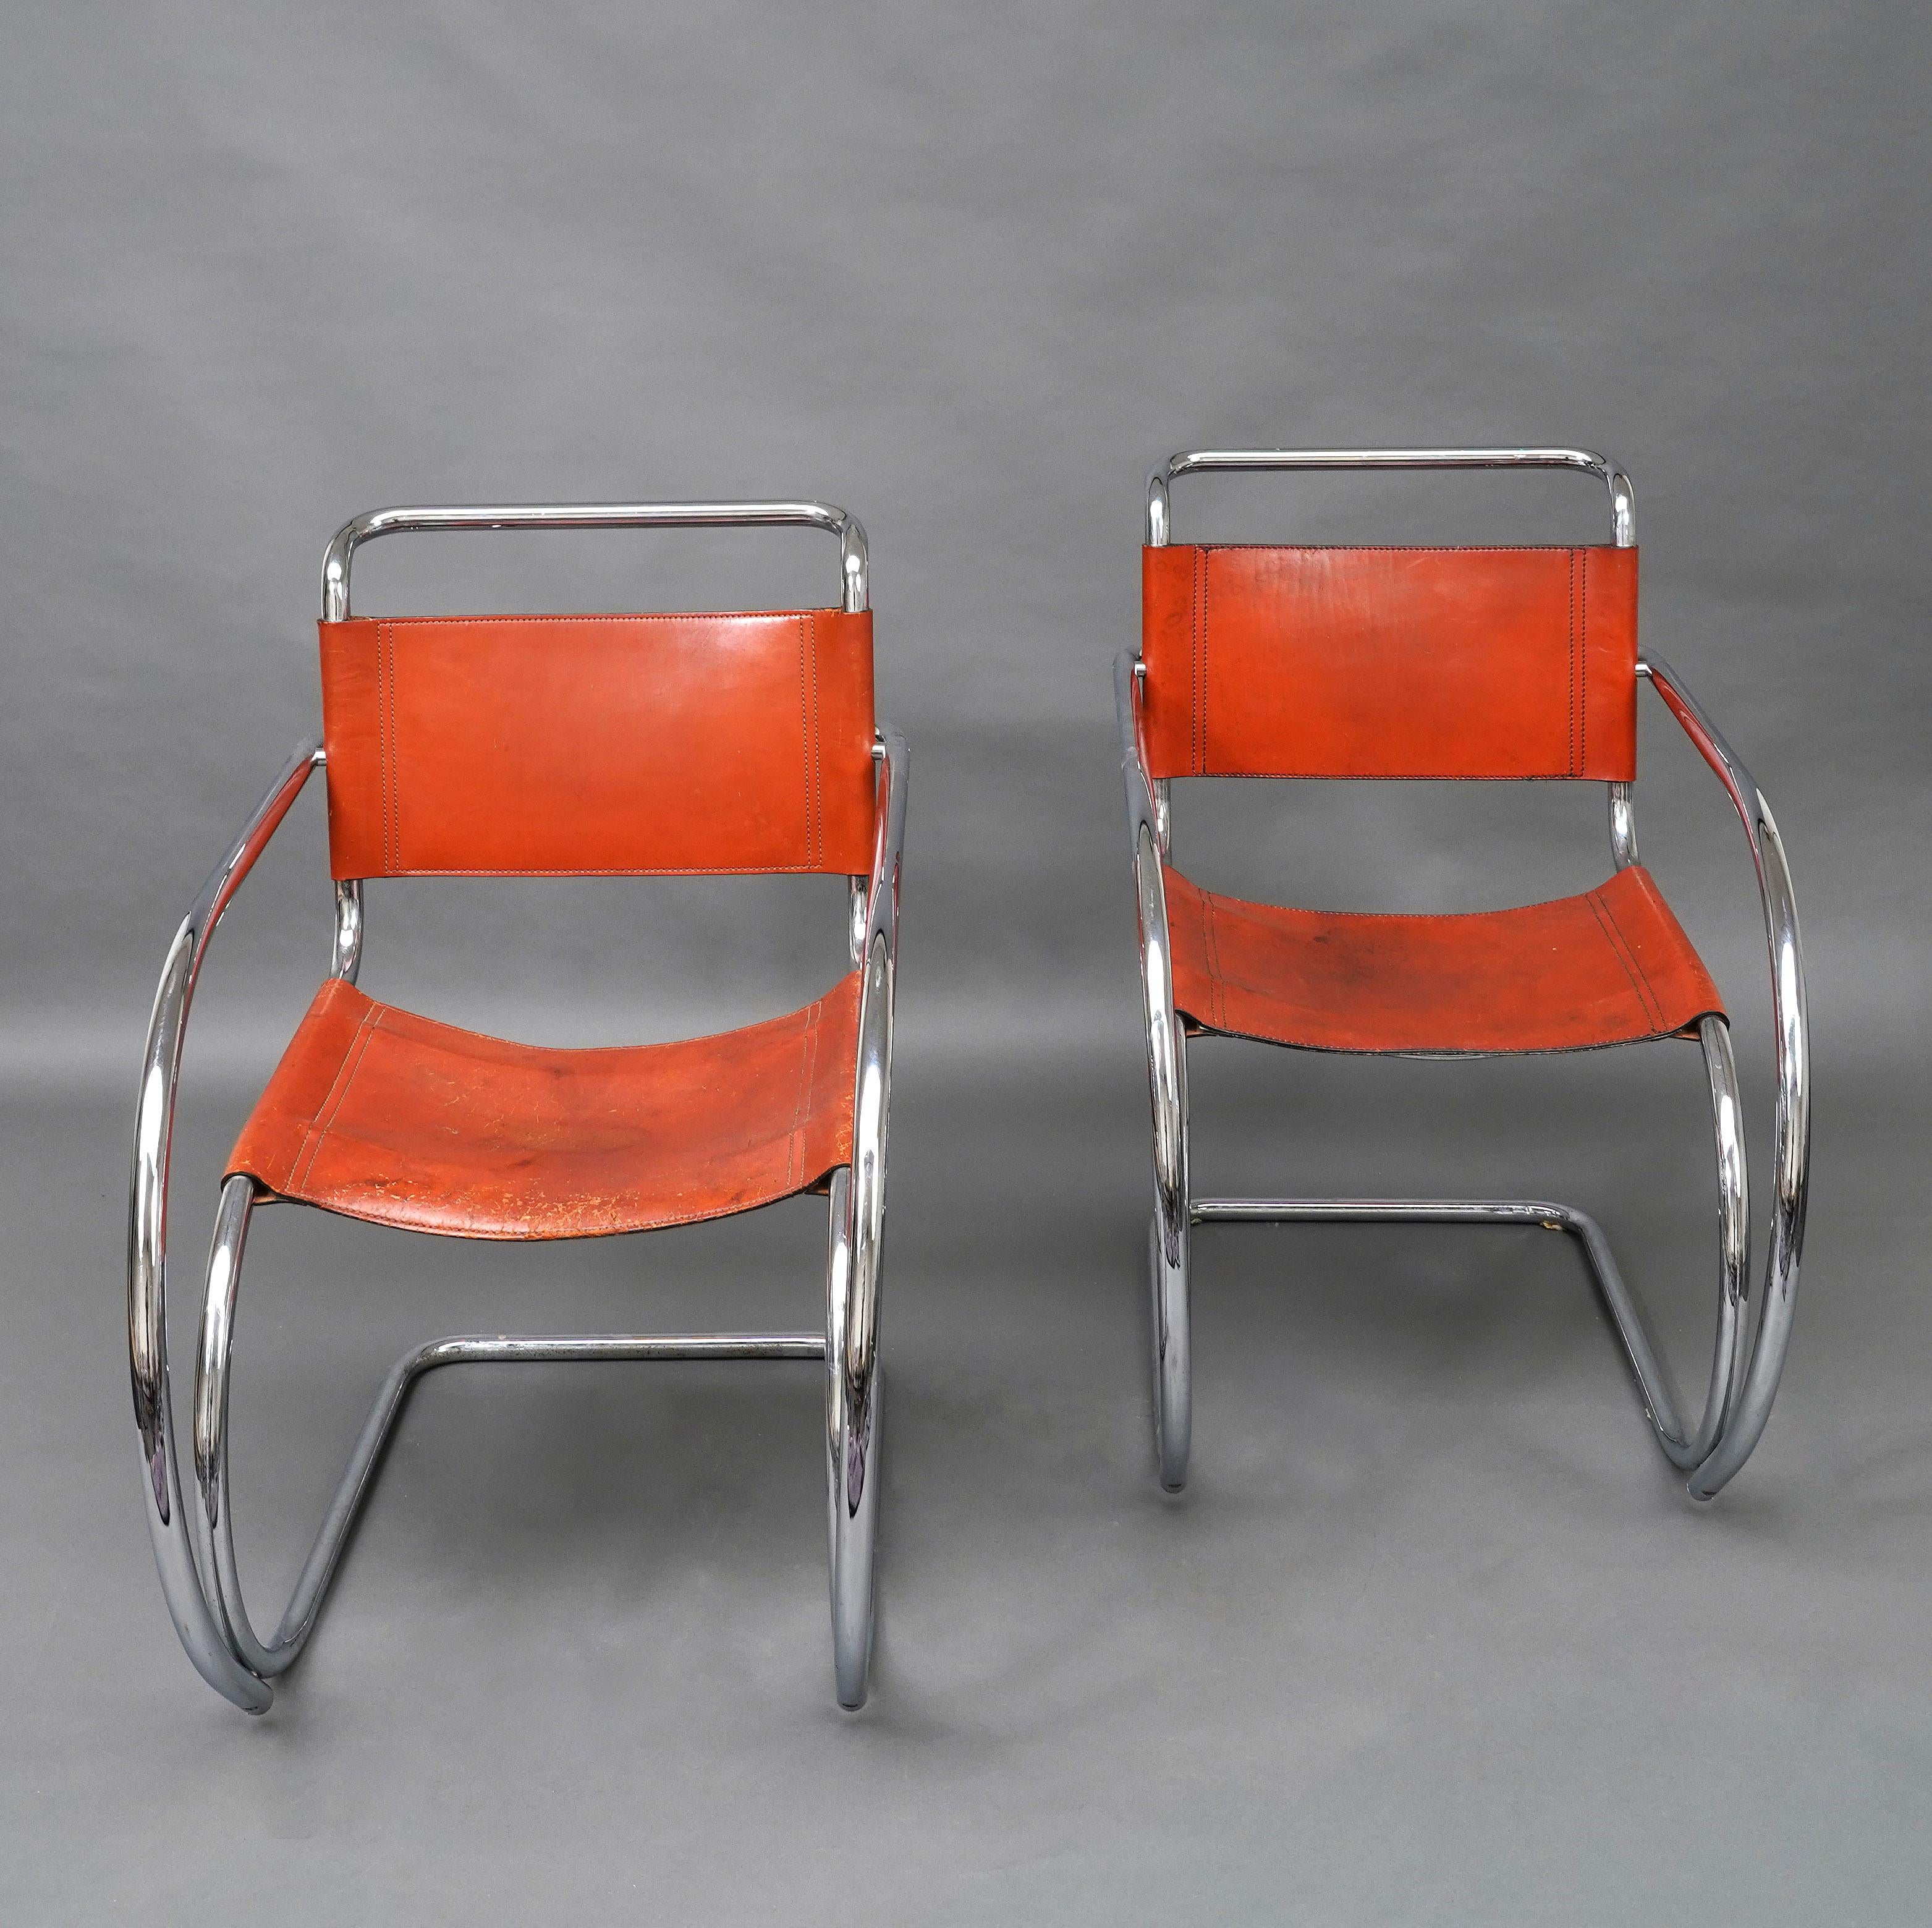 A  pair of soft-lined armchairs made of chromed steel tubes forming the seat, armrests and legs in one piece, with patinated red leather. 

The MR20 armchair represents some of the earliest steel furniture designs by Mies van der Rohe. The chromed